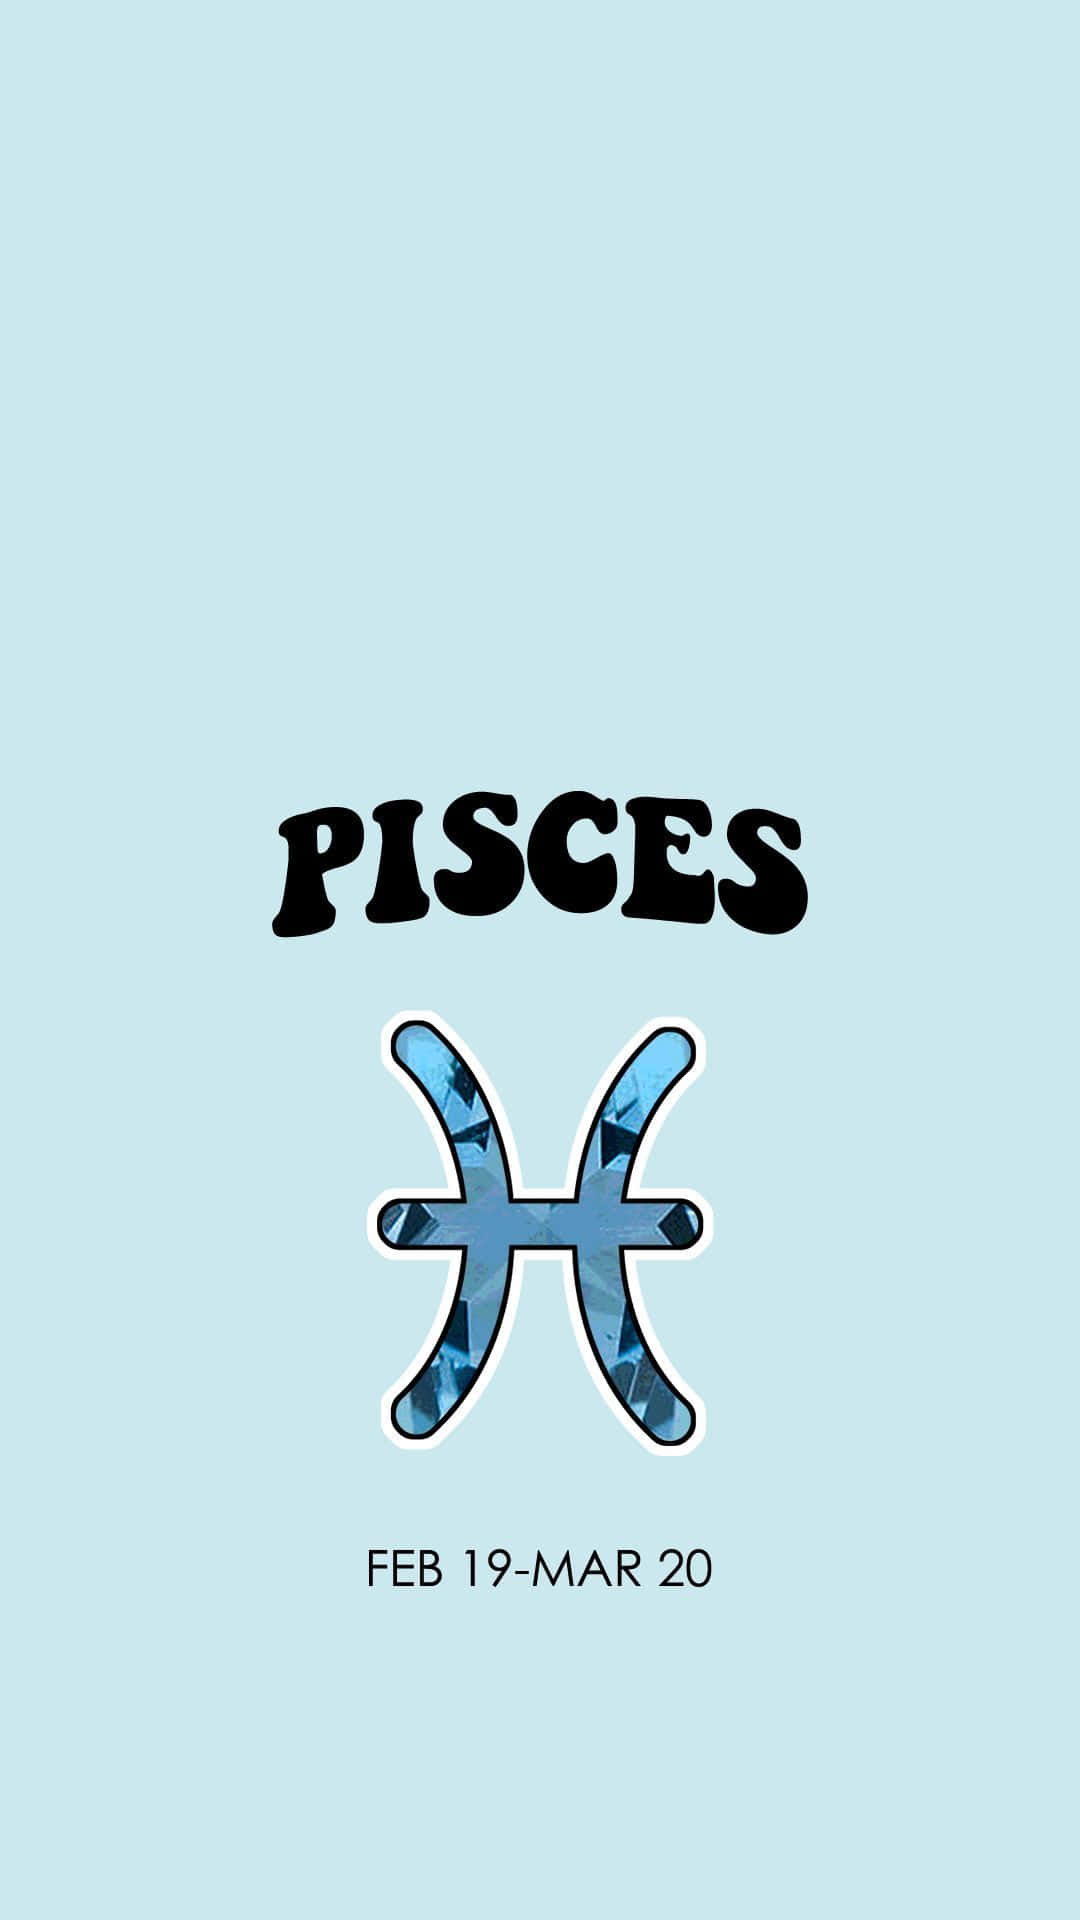 "The begining of the season of Pisces, time to reconnect with nature and be inspired."